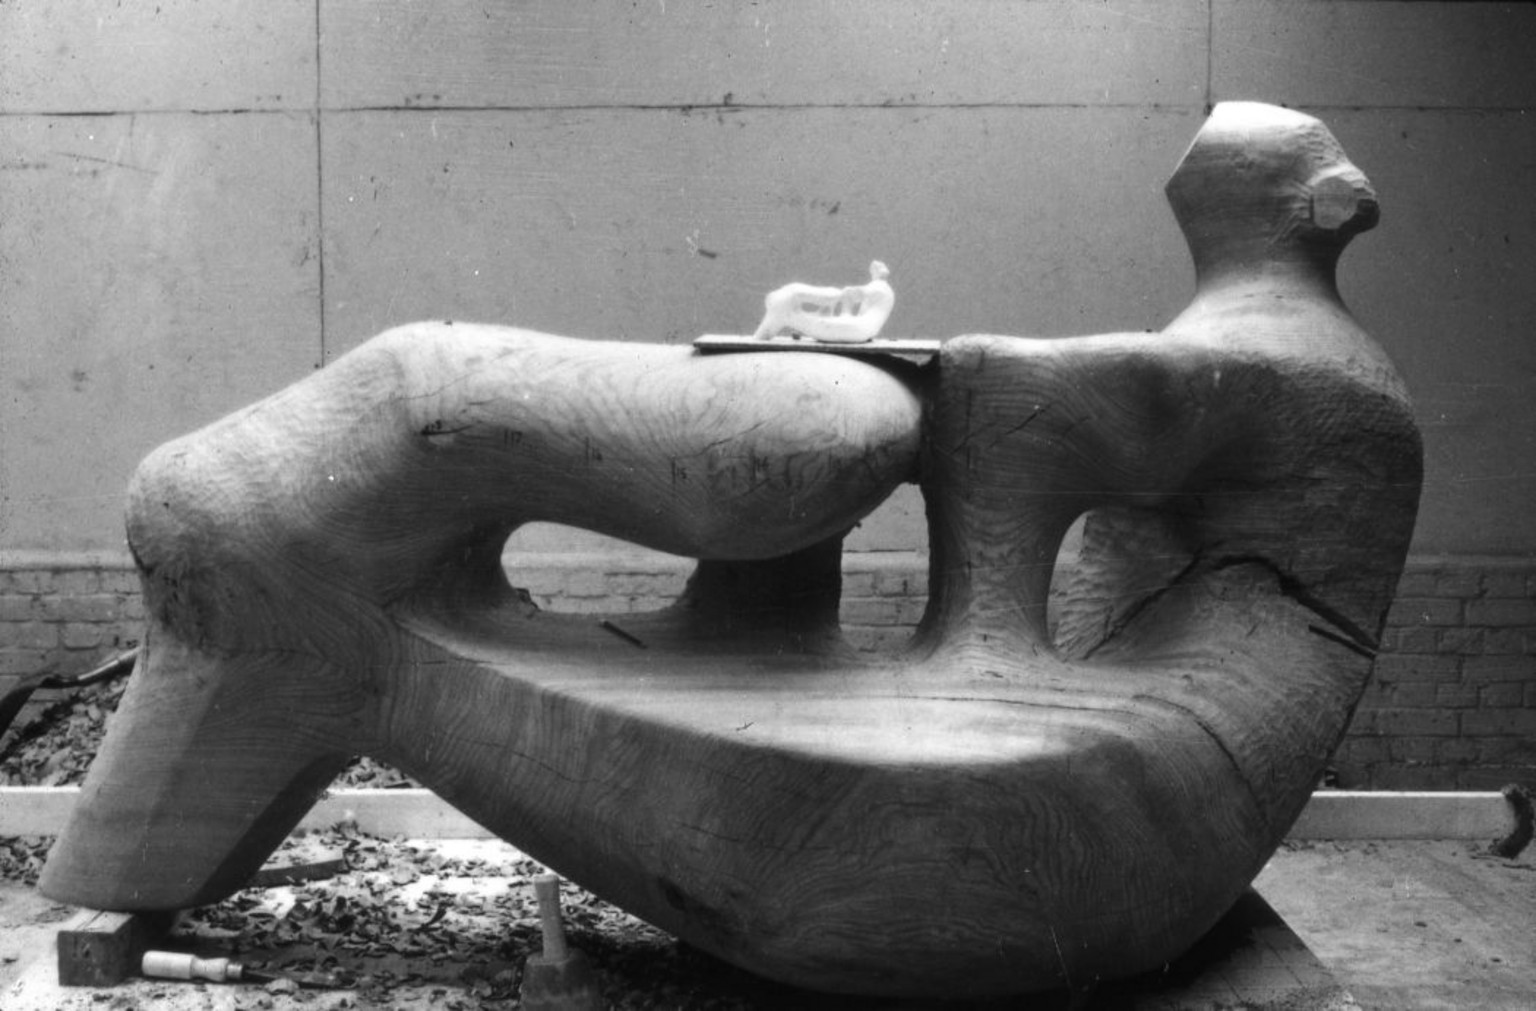 Ann Compton, \'\'An Moore\'s | Moore: (Henry essentially kind Tate Sculpture rhythm\': and in Identity) Wood\' Sculptural Rediscovering Henry of Process different Public